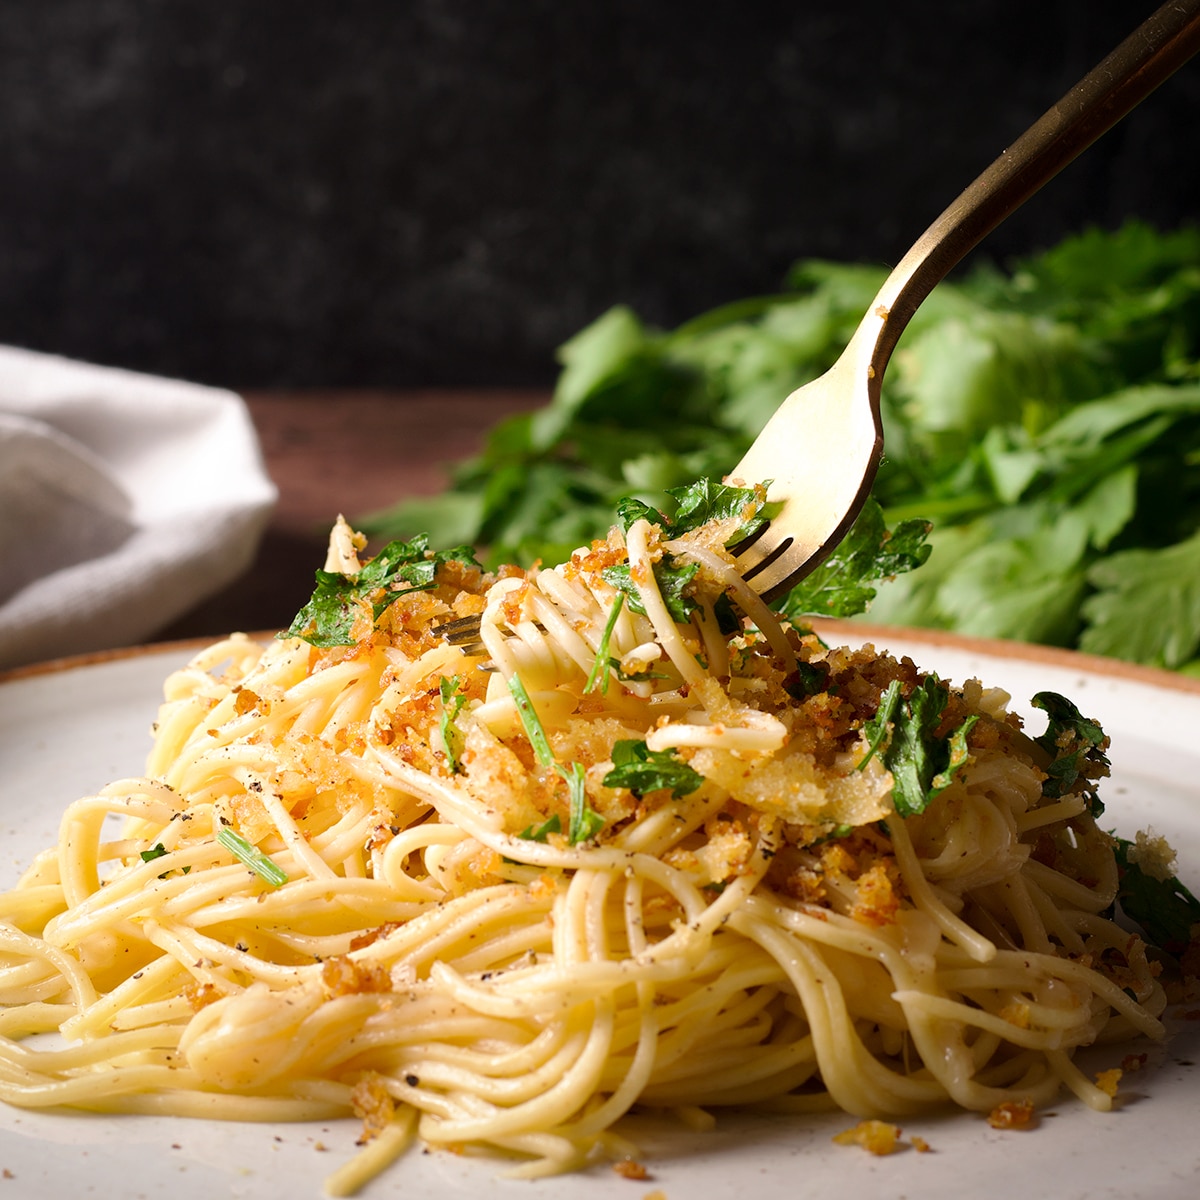 A white plate filled with spaghetti cooked in brown butter.